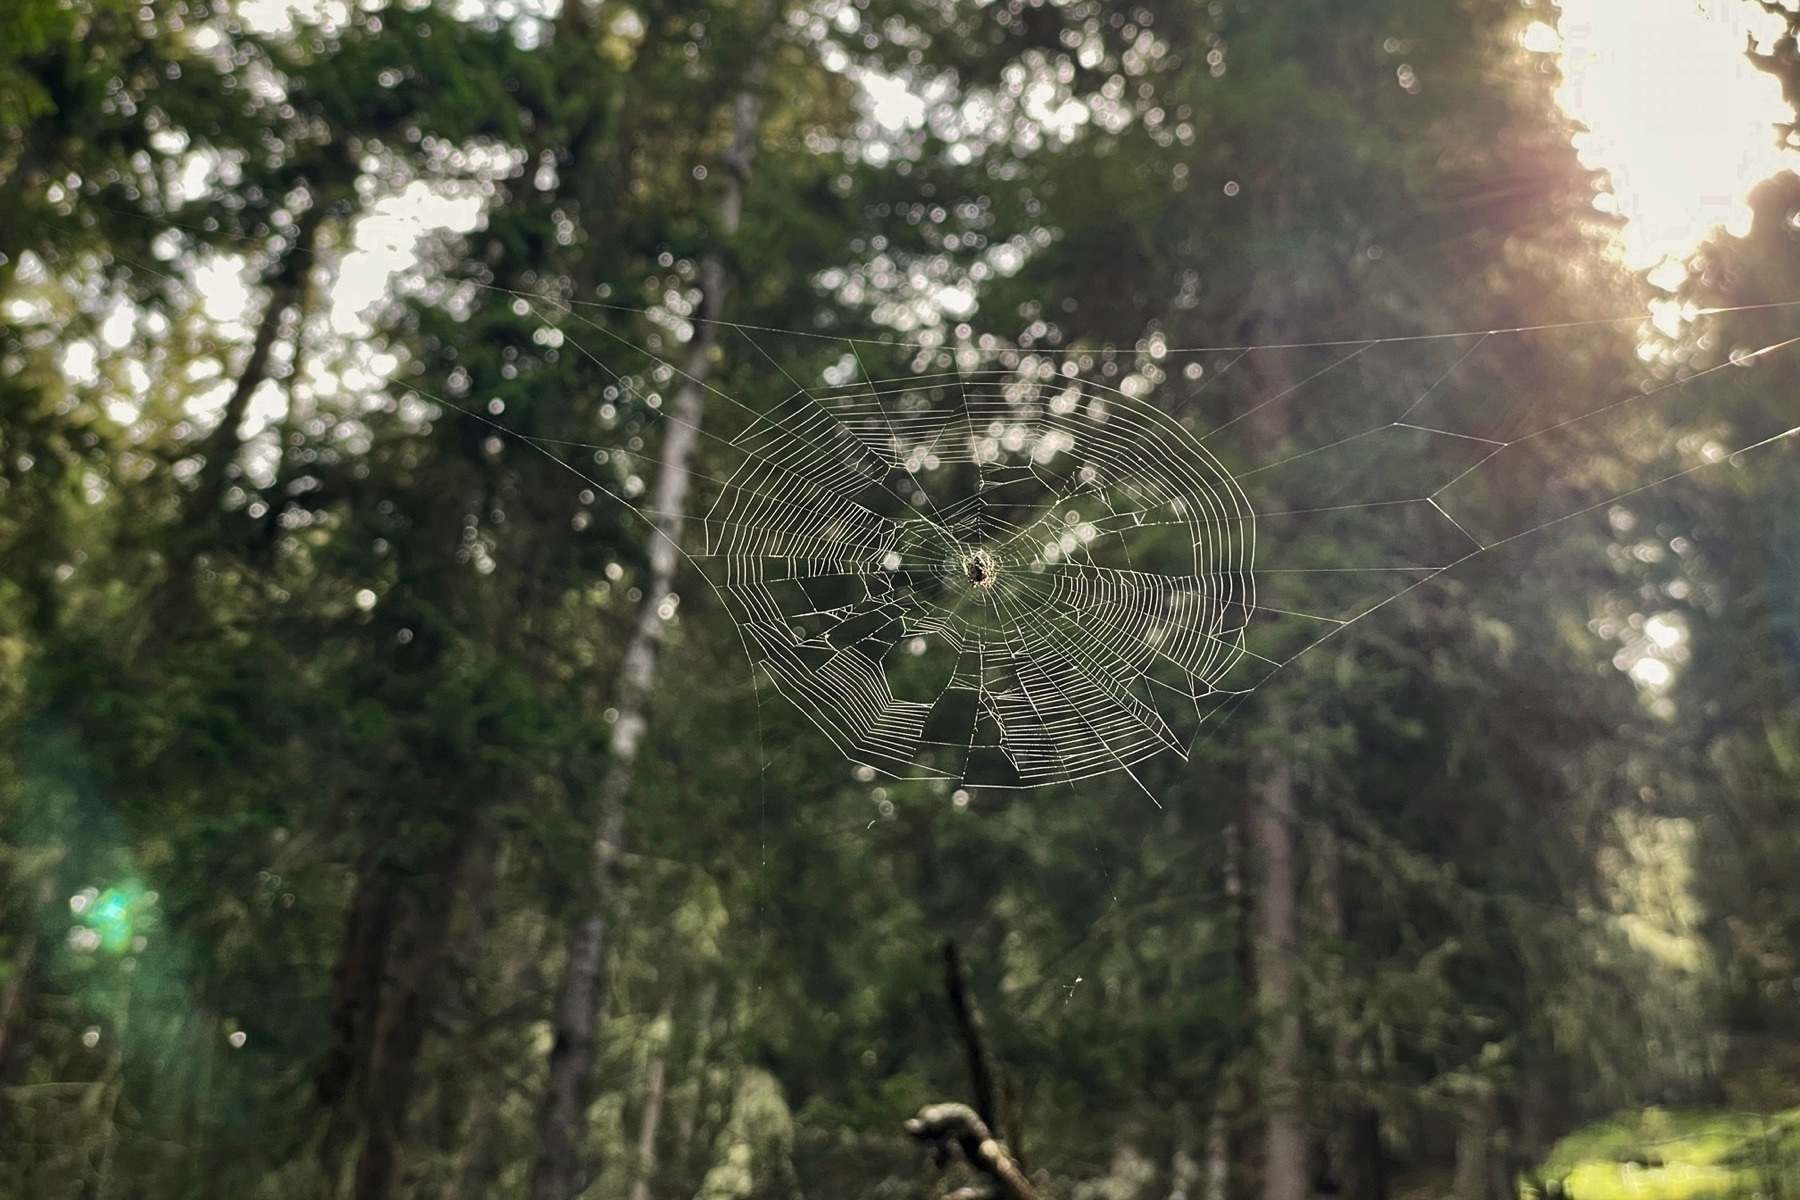 Spider web between two trees with a spider sitting there